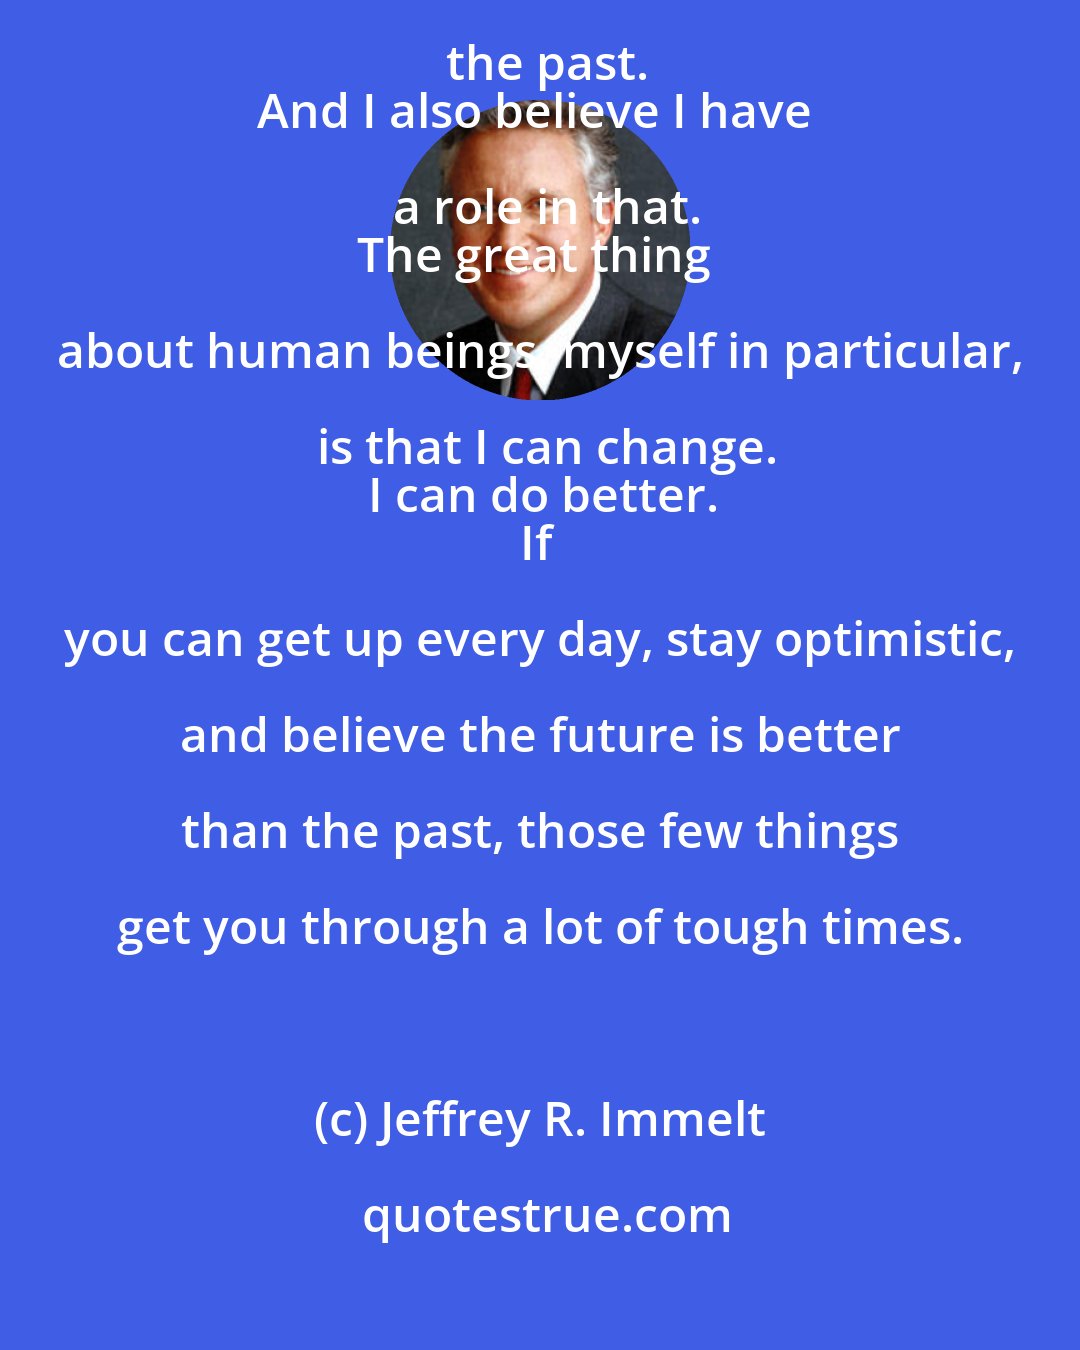 Jeffrey R. Immelt: I'm an optimist.
I've always believed the future is going to be better than the past.
And I also believe I have a role in that.
The great thing about human beings, myself in particular, is that I can change.
I can do better.
If you can get up every day, stay optimistic, and believe the future is better than the past, those few things get you through a lot of tough times.